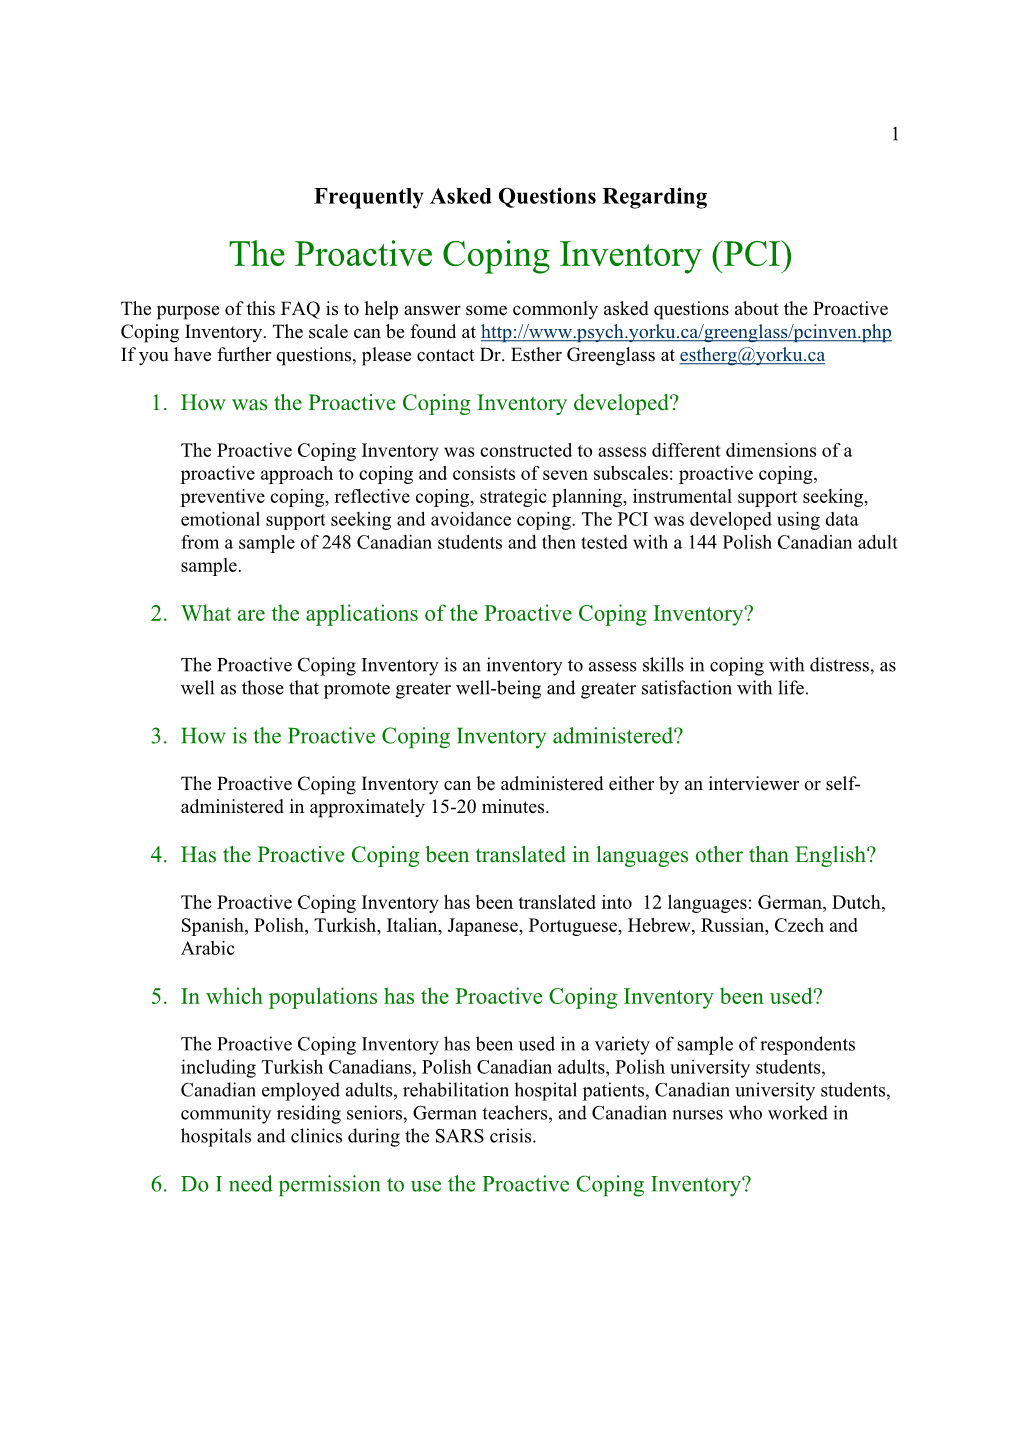 The Proactive Coping Inventory (PCI)